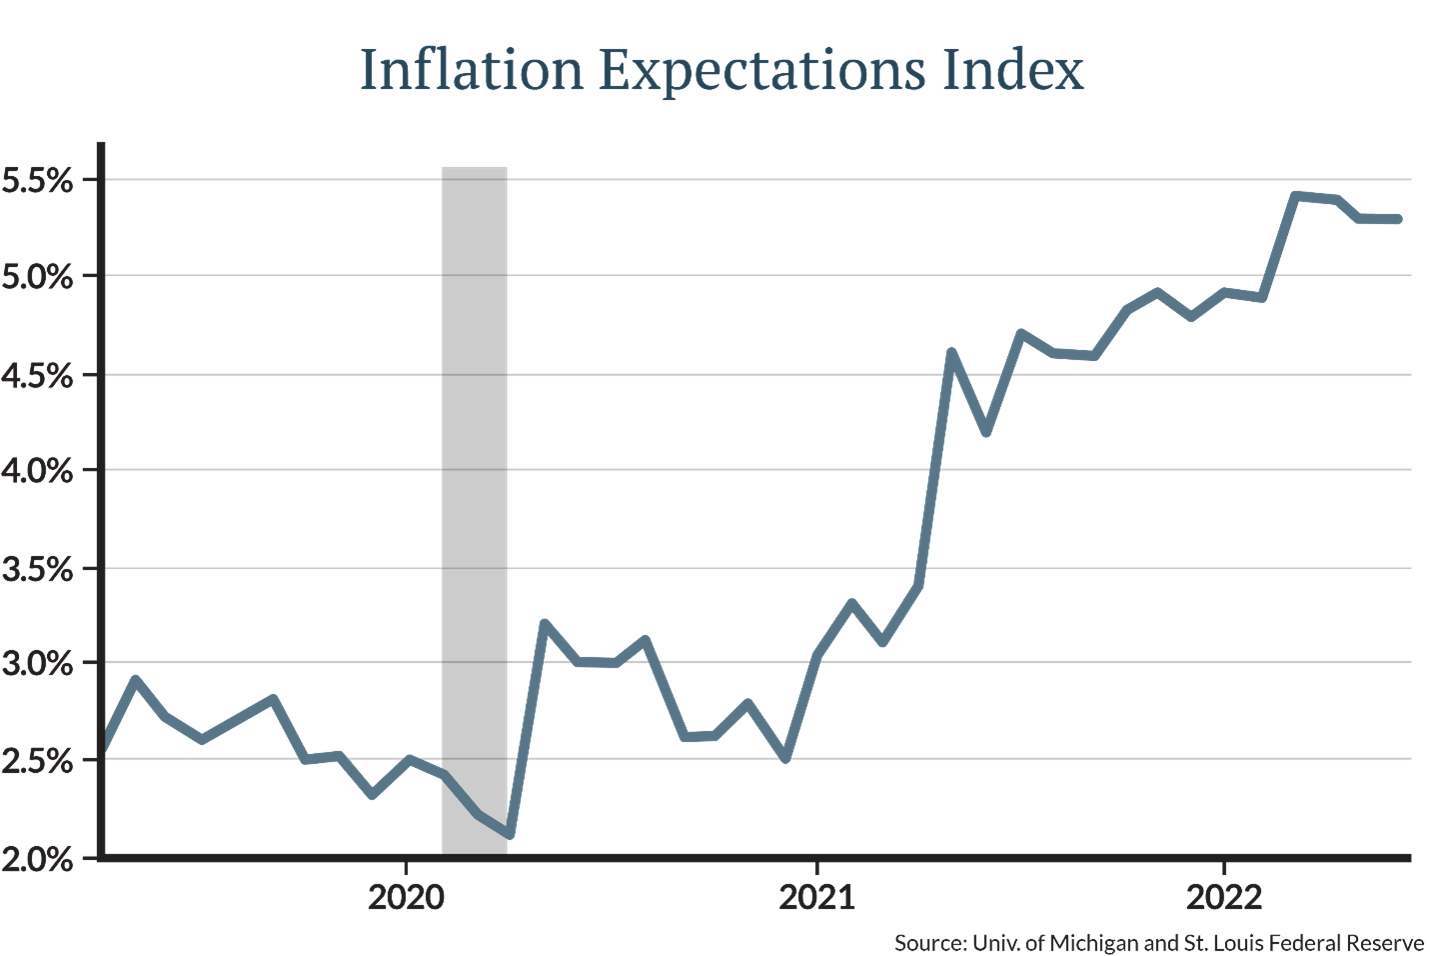 ast week Friday, the report showed that people expect inflation of 5.1%, down slightly from the previous reading of 5.3%.